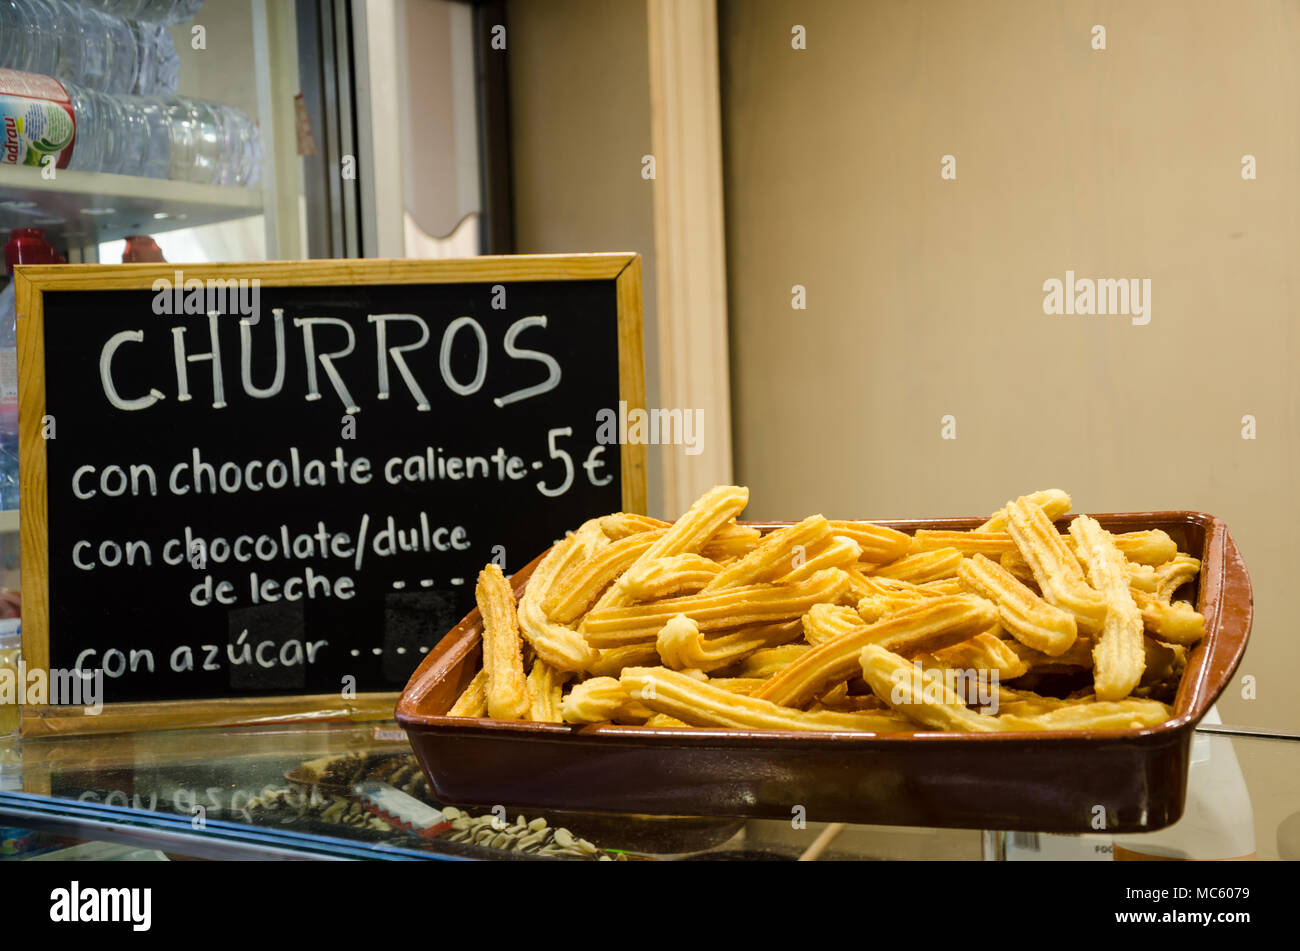 A large dish of churros and a blackboard with prices advertises the snack for sale. Stock Photo